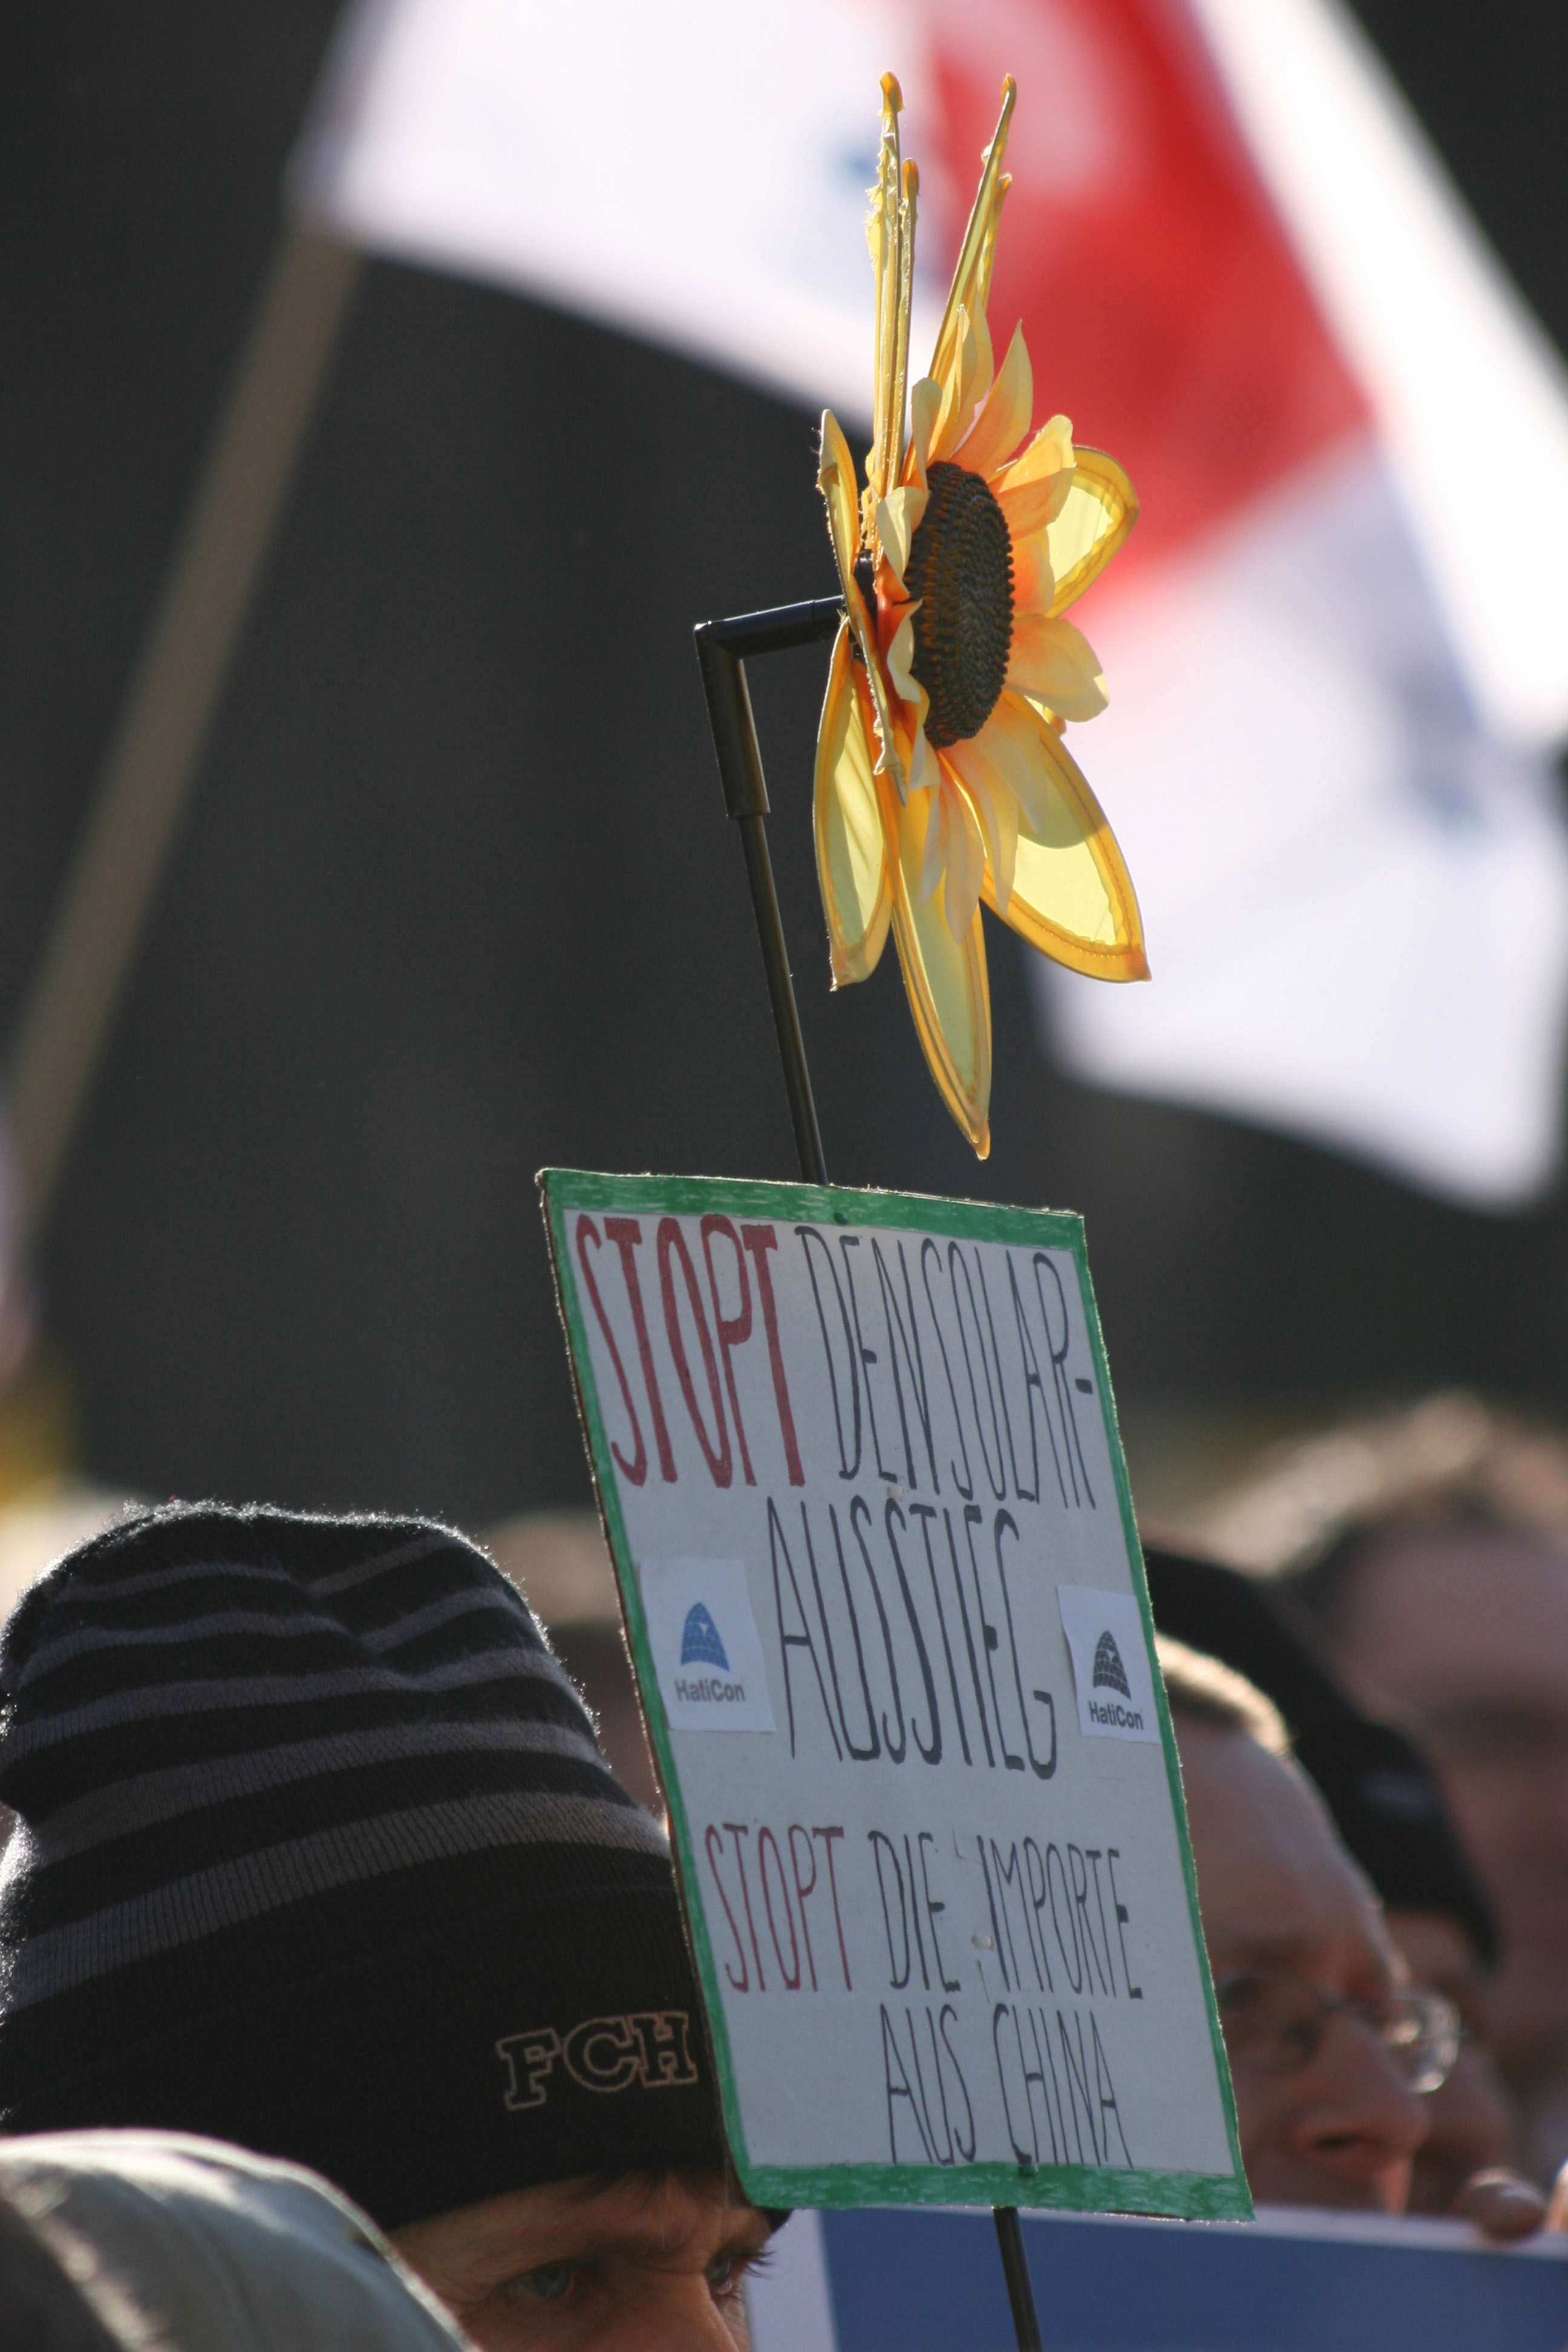 Sunflower - A protester near the Brandenburg Gate (Brandenburger Tor) in Berlin during a demonstration over cuts in Solar Power subsidies